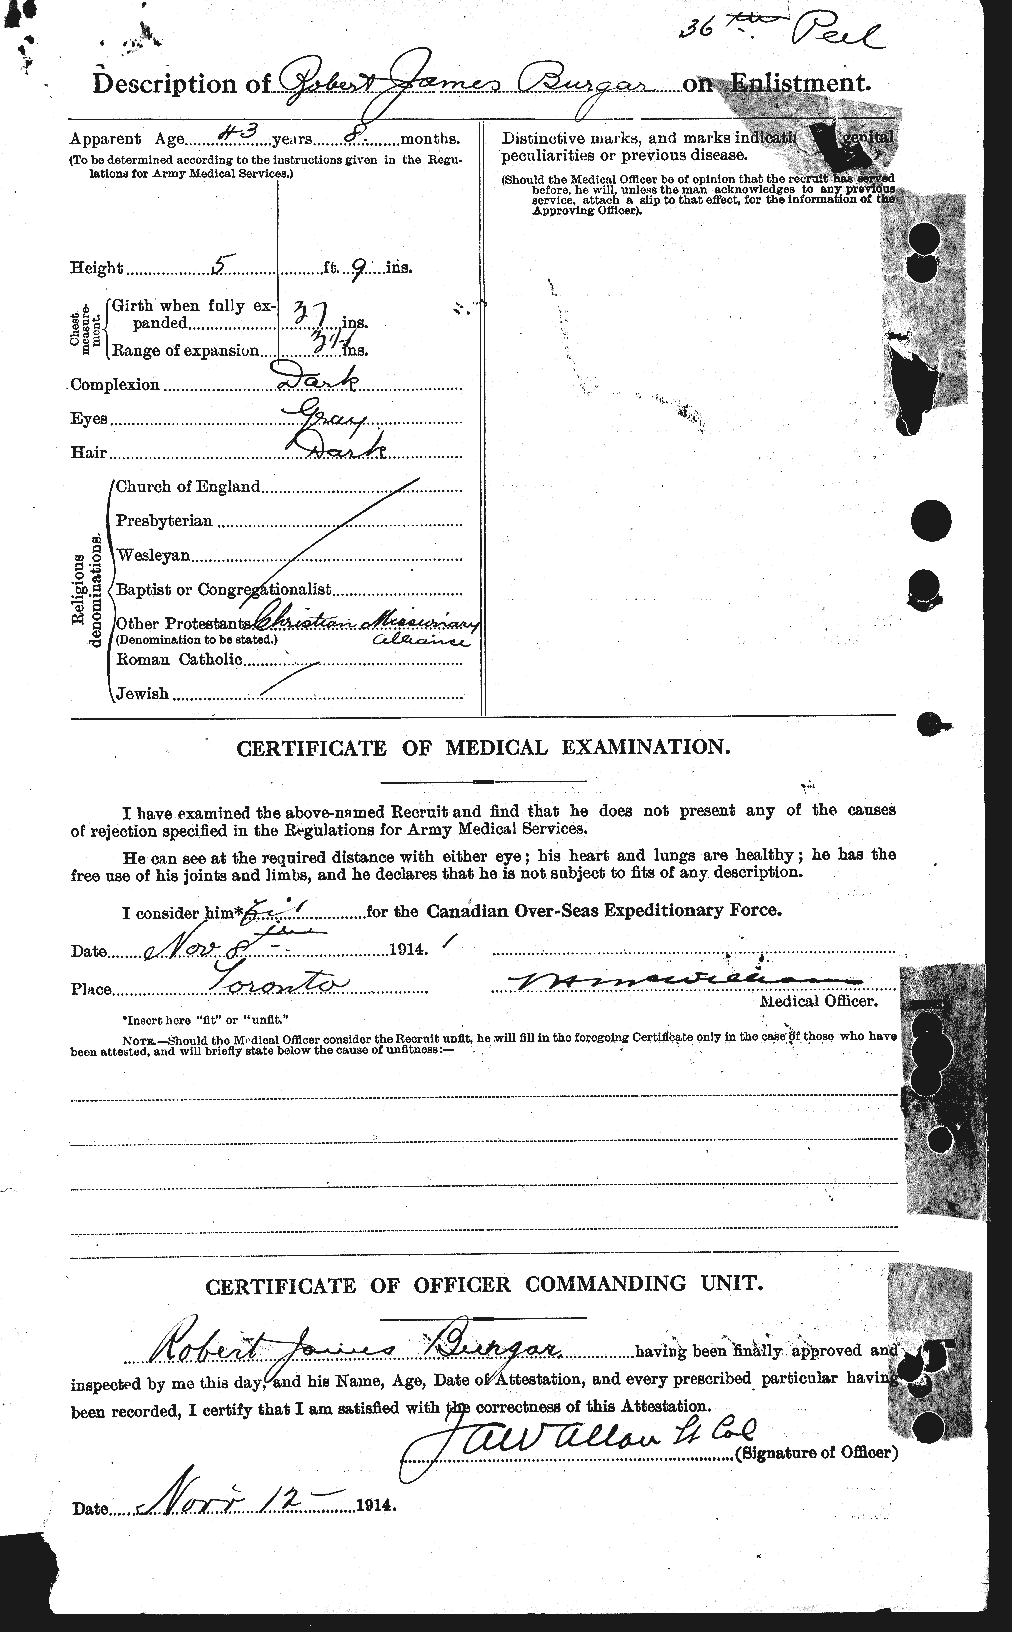 Personnel Records of the First World War - CEF 275243b